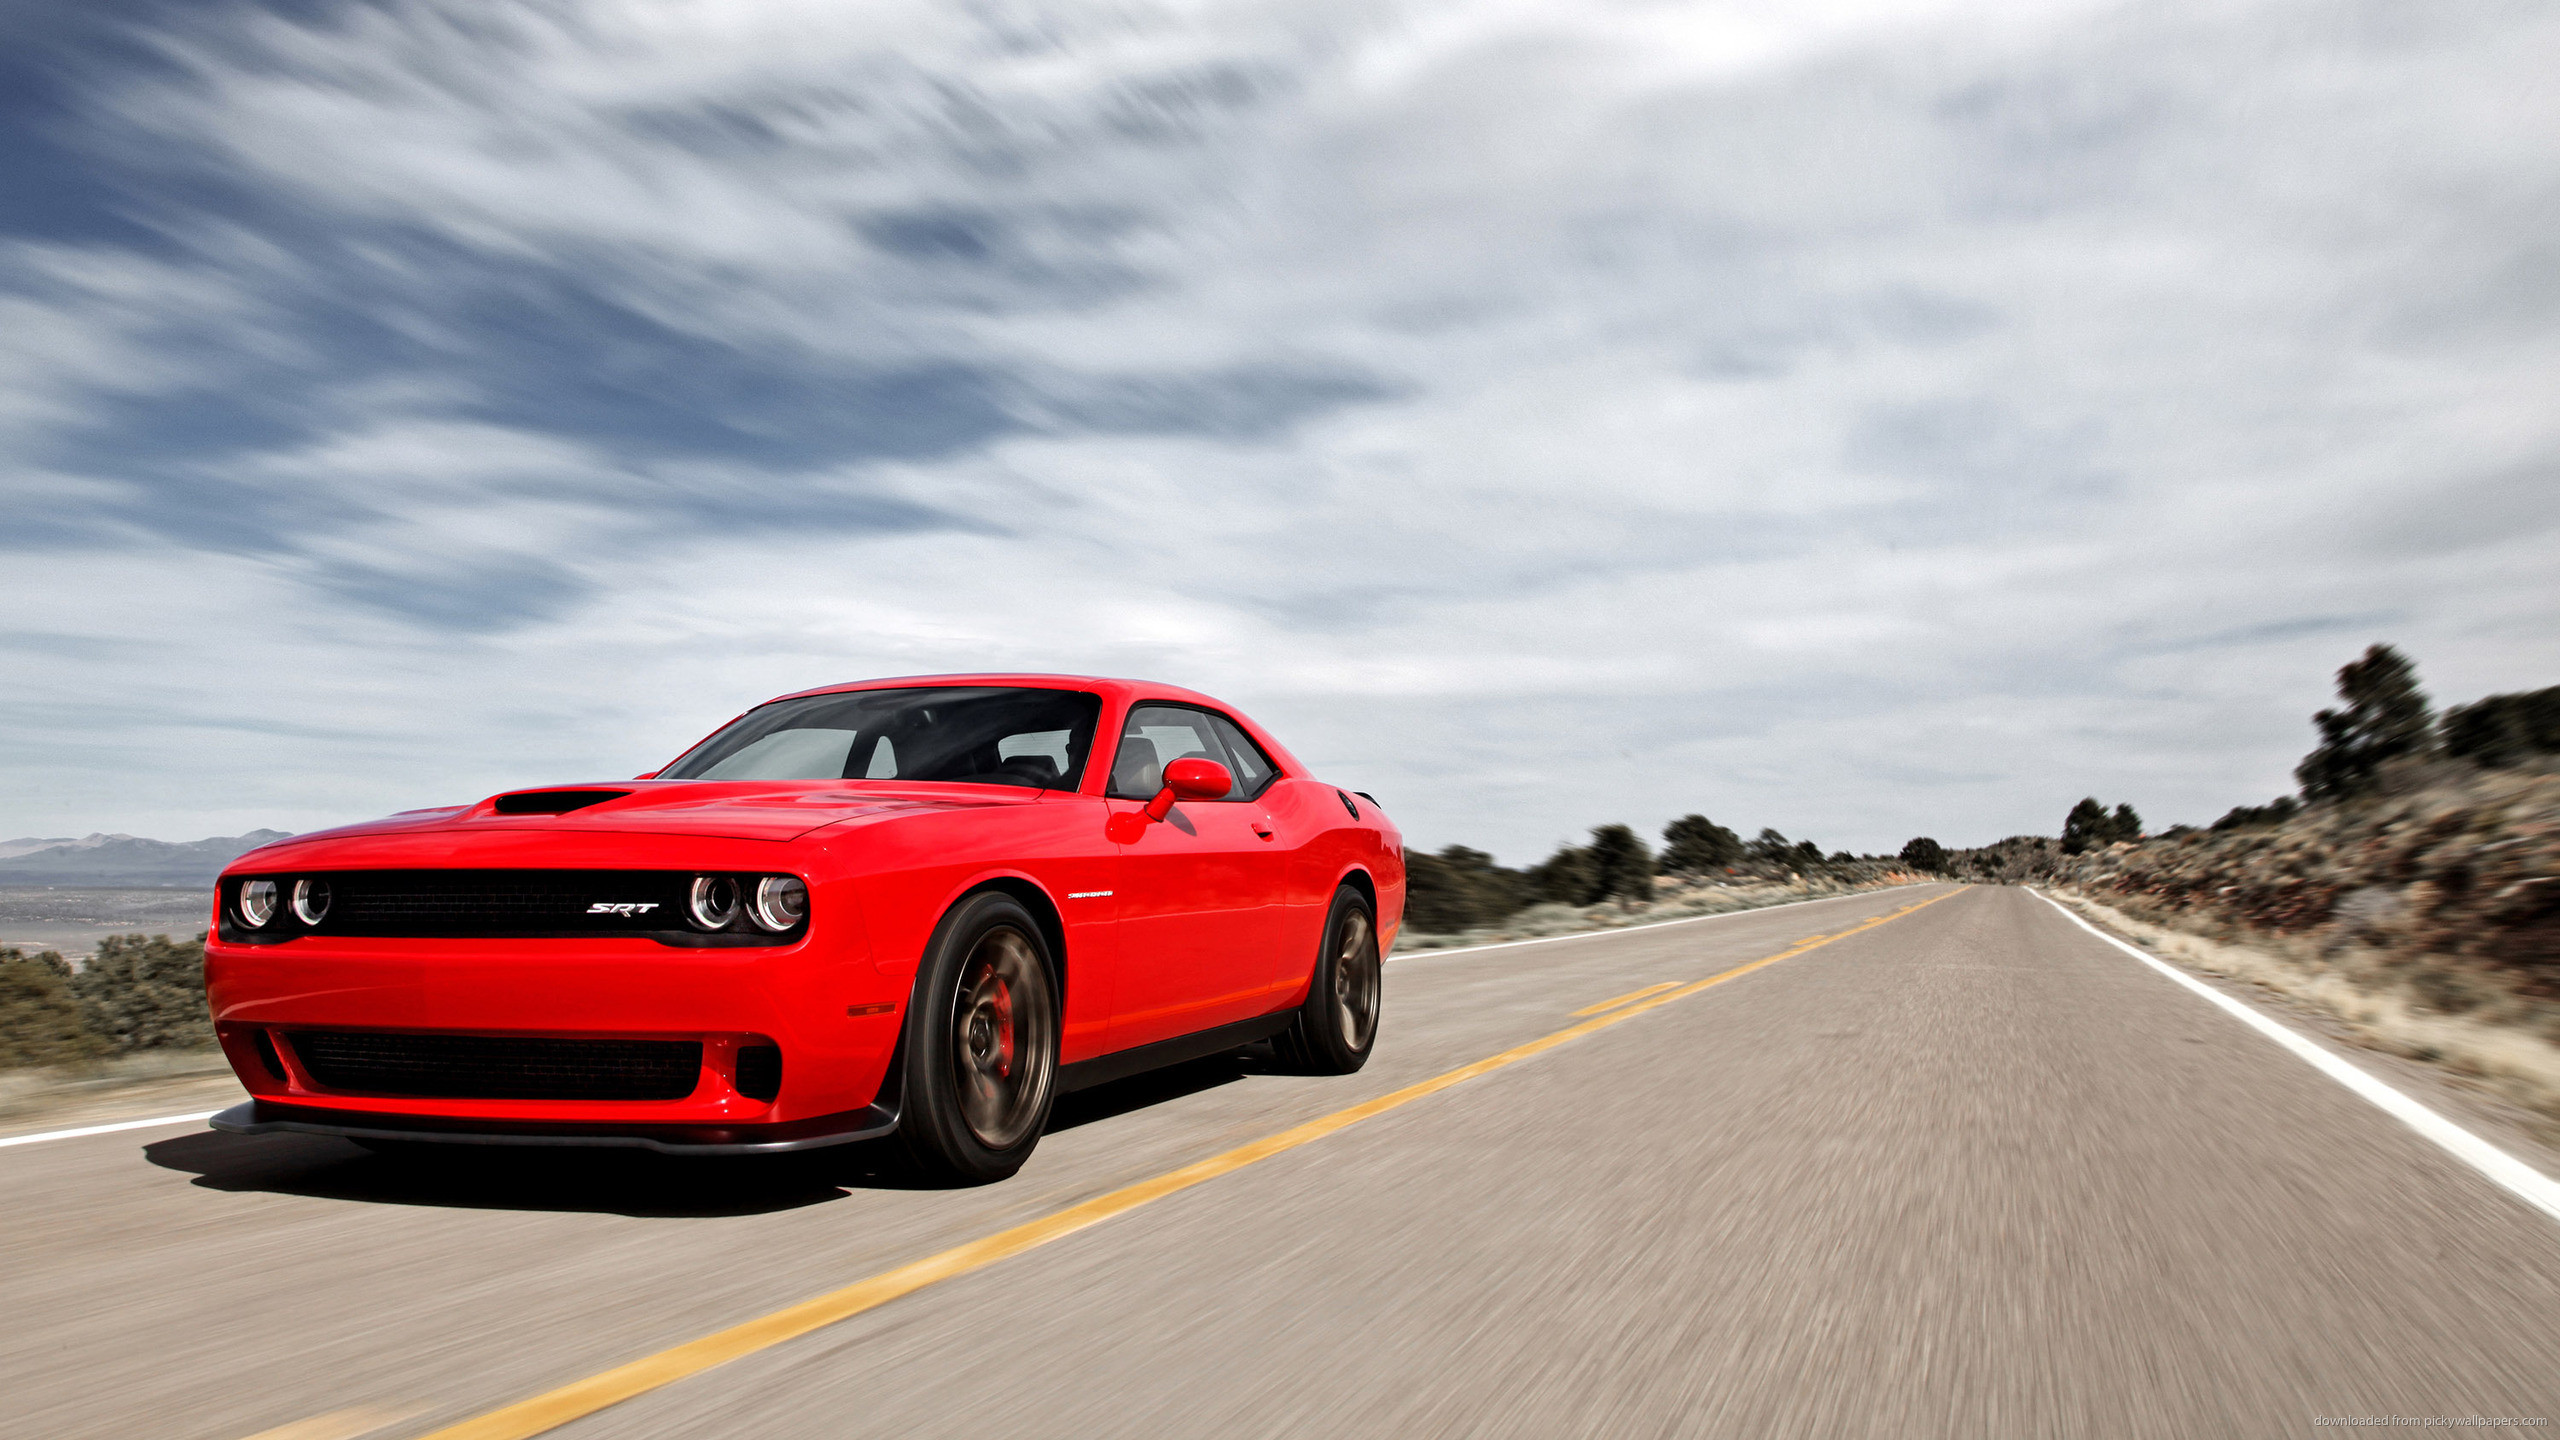 2560x1440 Red Dodge Challenger SRT Hellcat On The Road for 